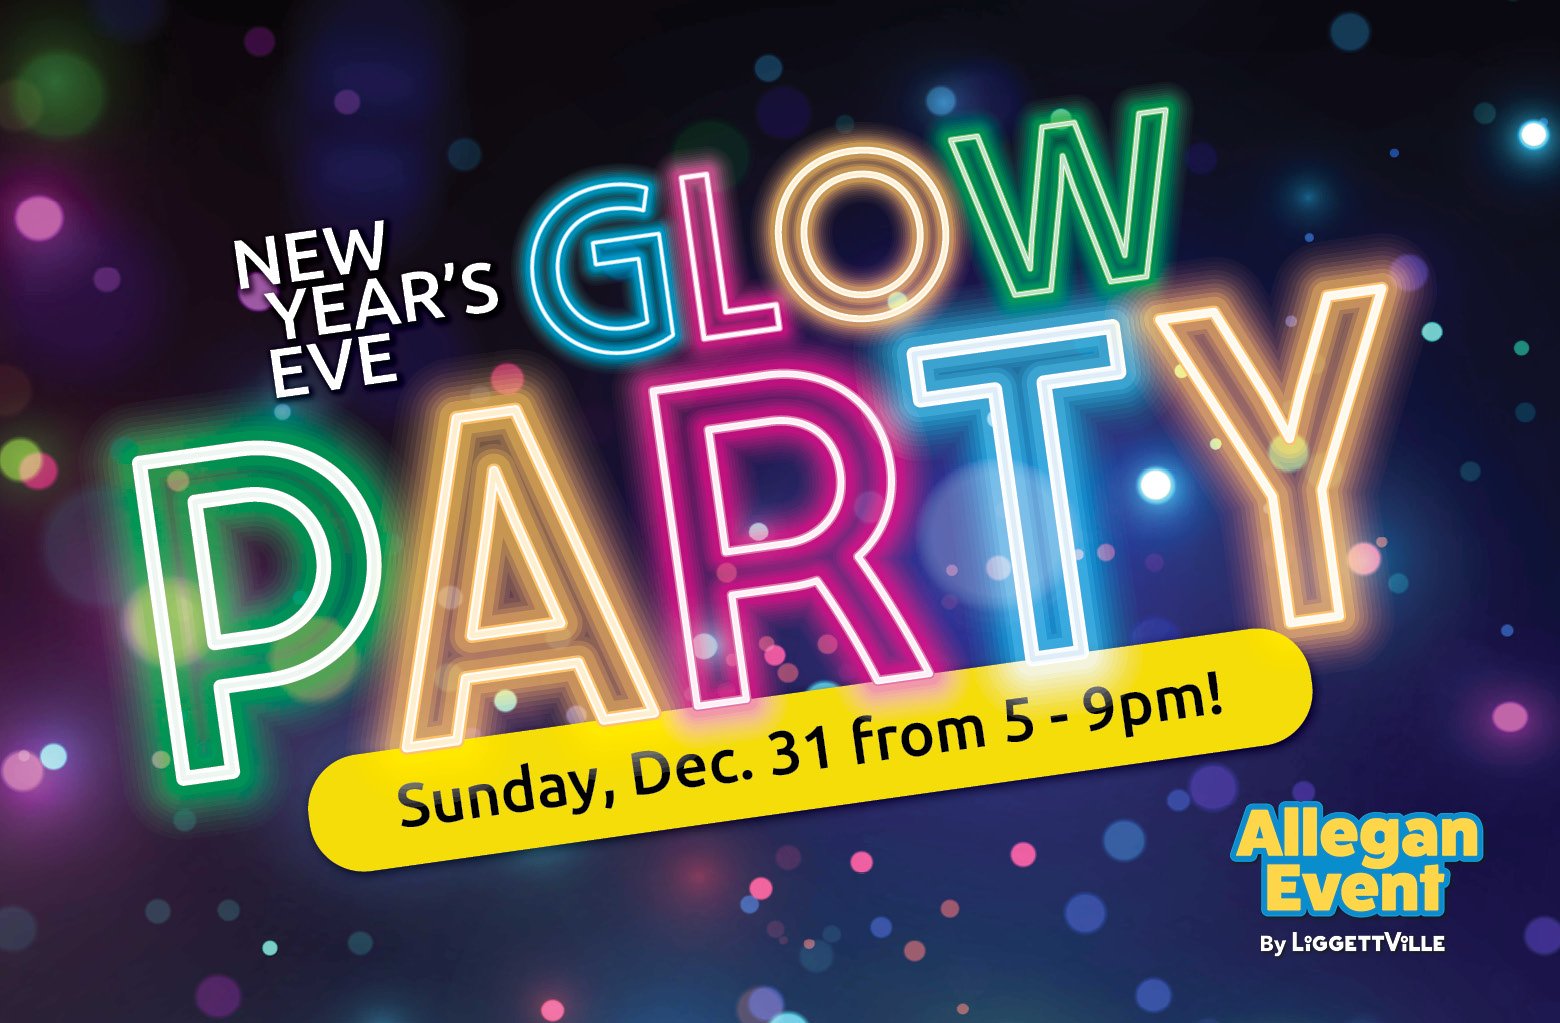 Allegan Event New Year's Eve Family Glow Party! — Allegan Event